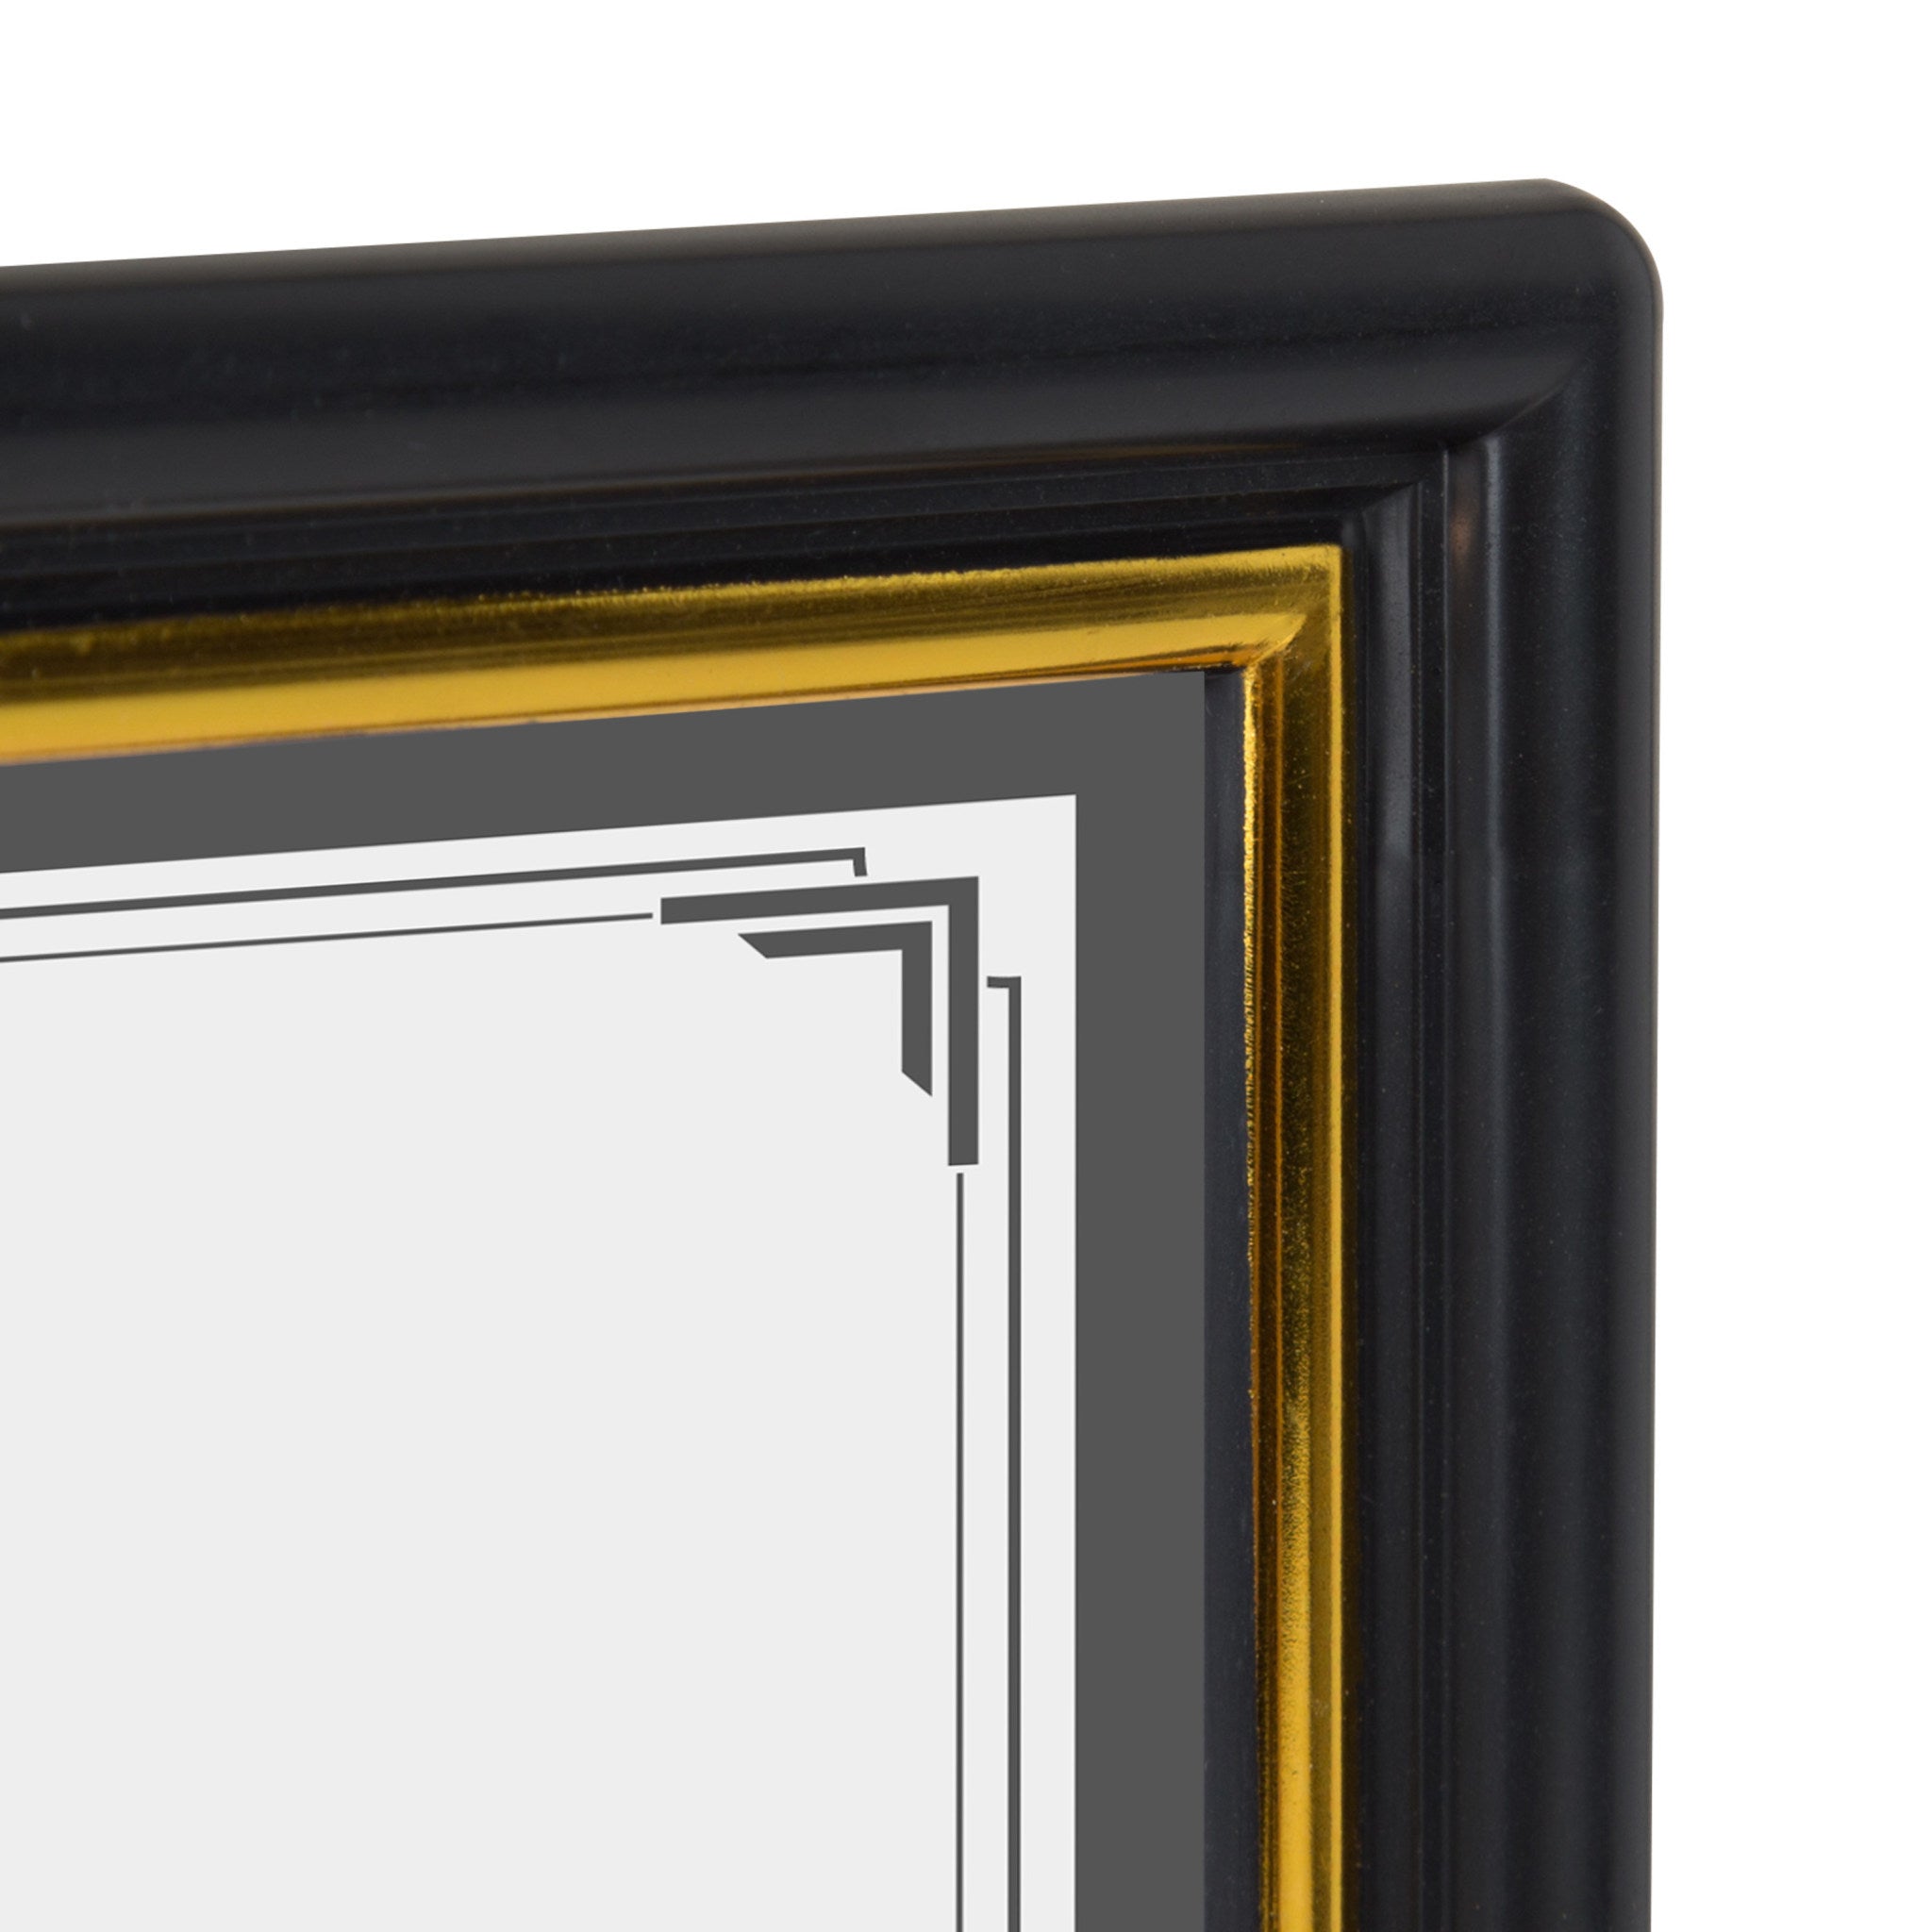 Corporate 8.5x11 Document Picture Frame, Set of 12